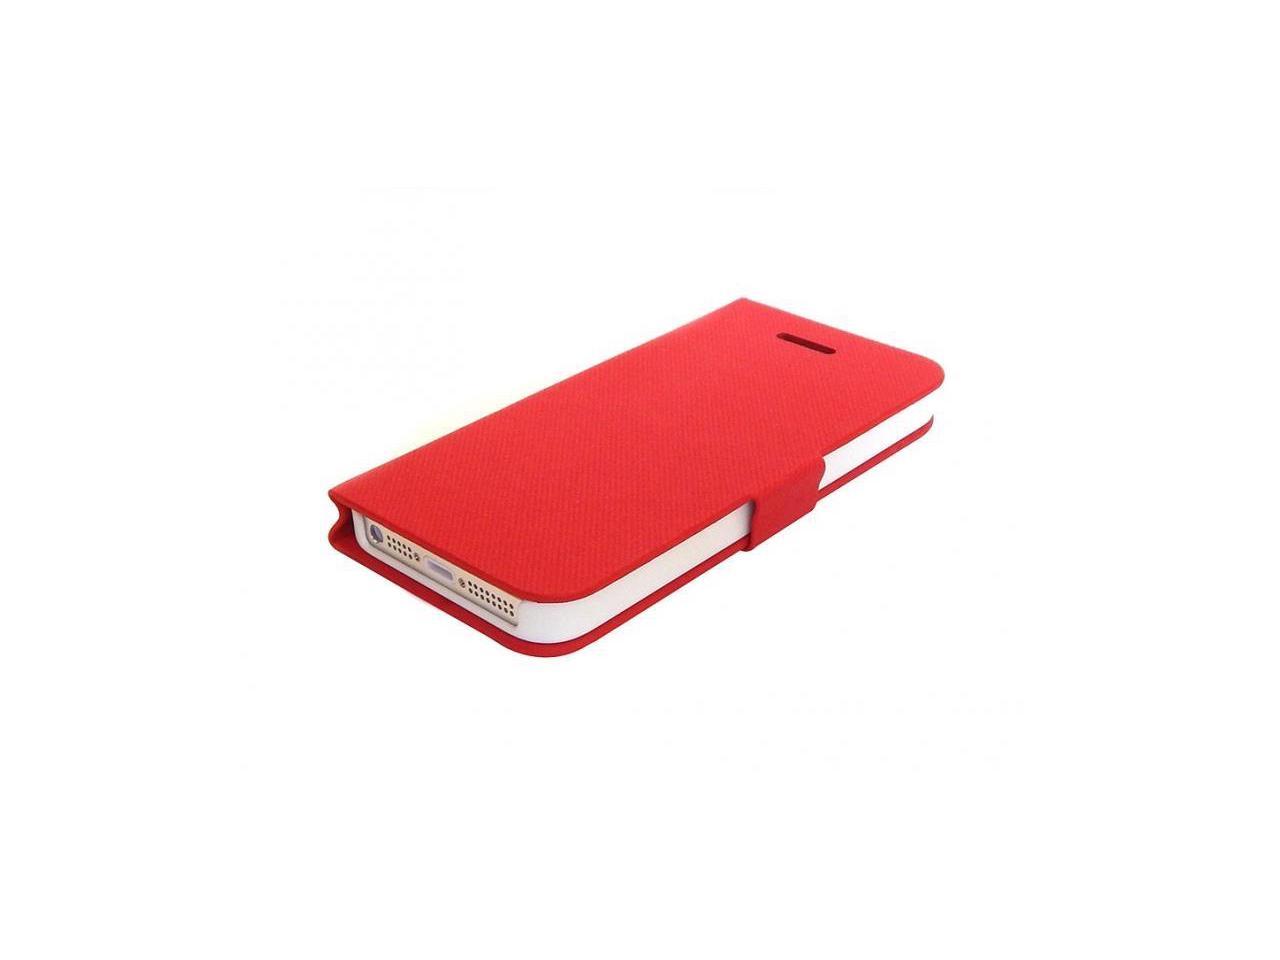 NEON Red iPhone 5 Flip Cover with Auto-Sleep Function Model IPH5-FLI-RD